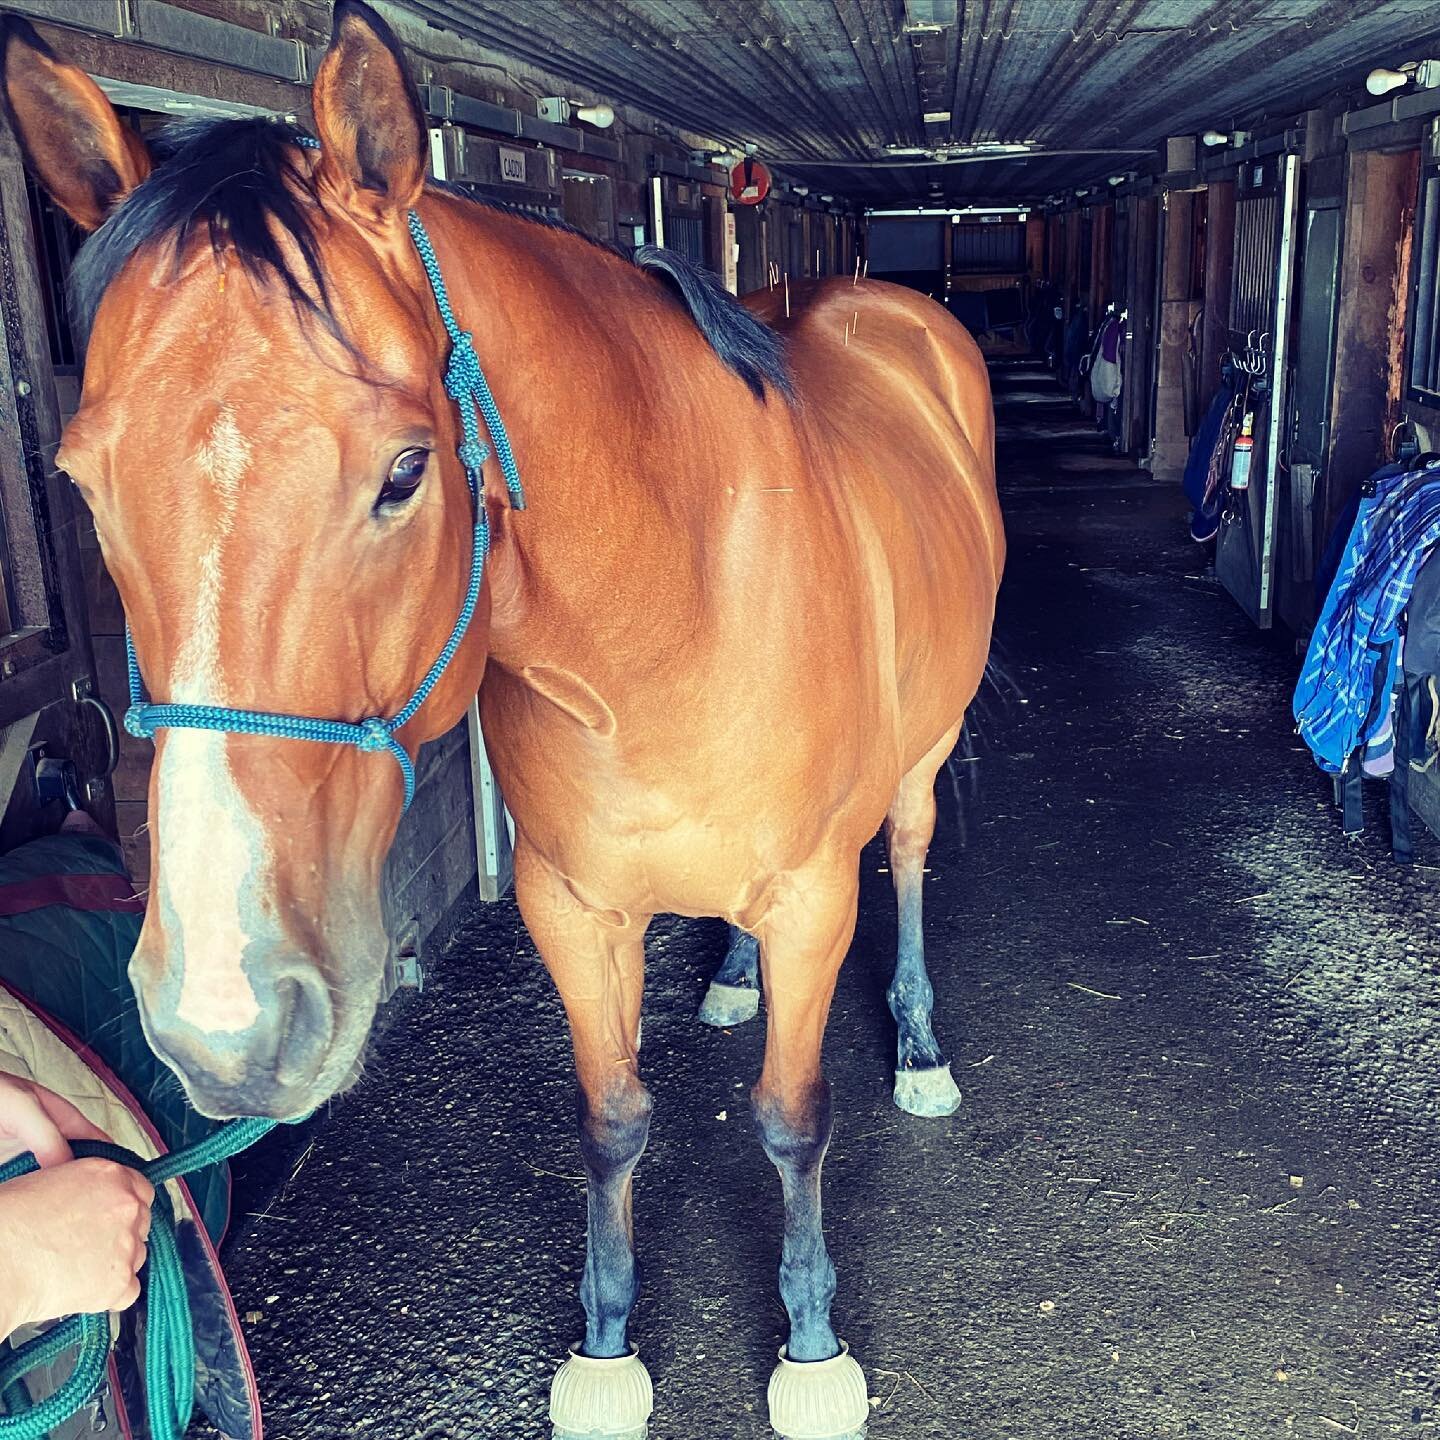 Feeling wonky? Dr. Vassar can help! Plan ahead for your show tune-ups and get on the schedule.  #equineveterinarian #equinesportsmedicine #ottb #equinerehab #equineacupuncture